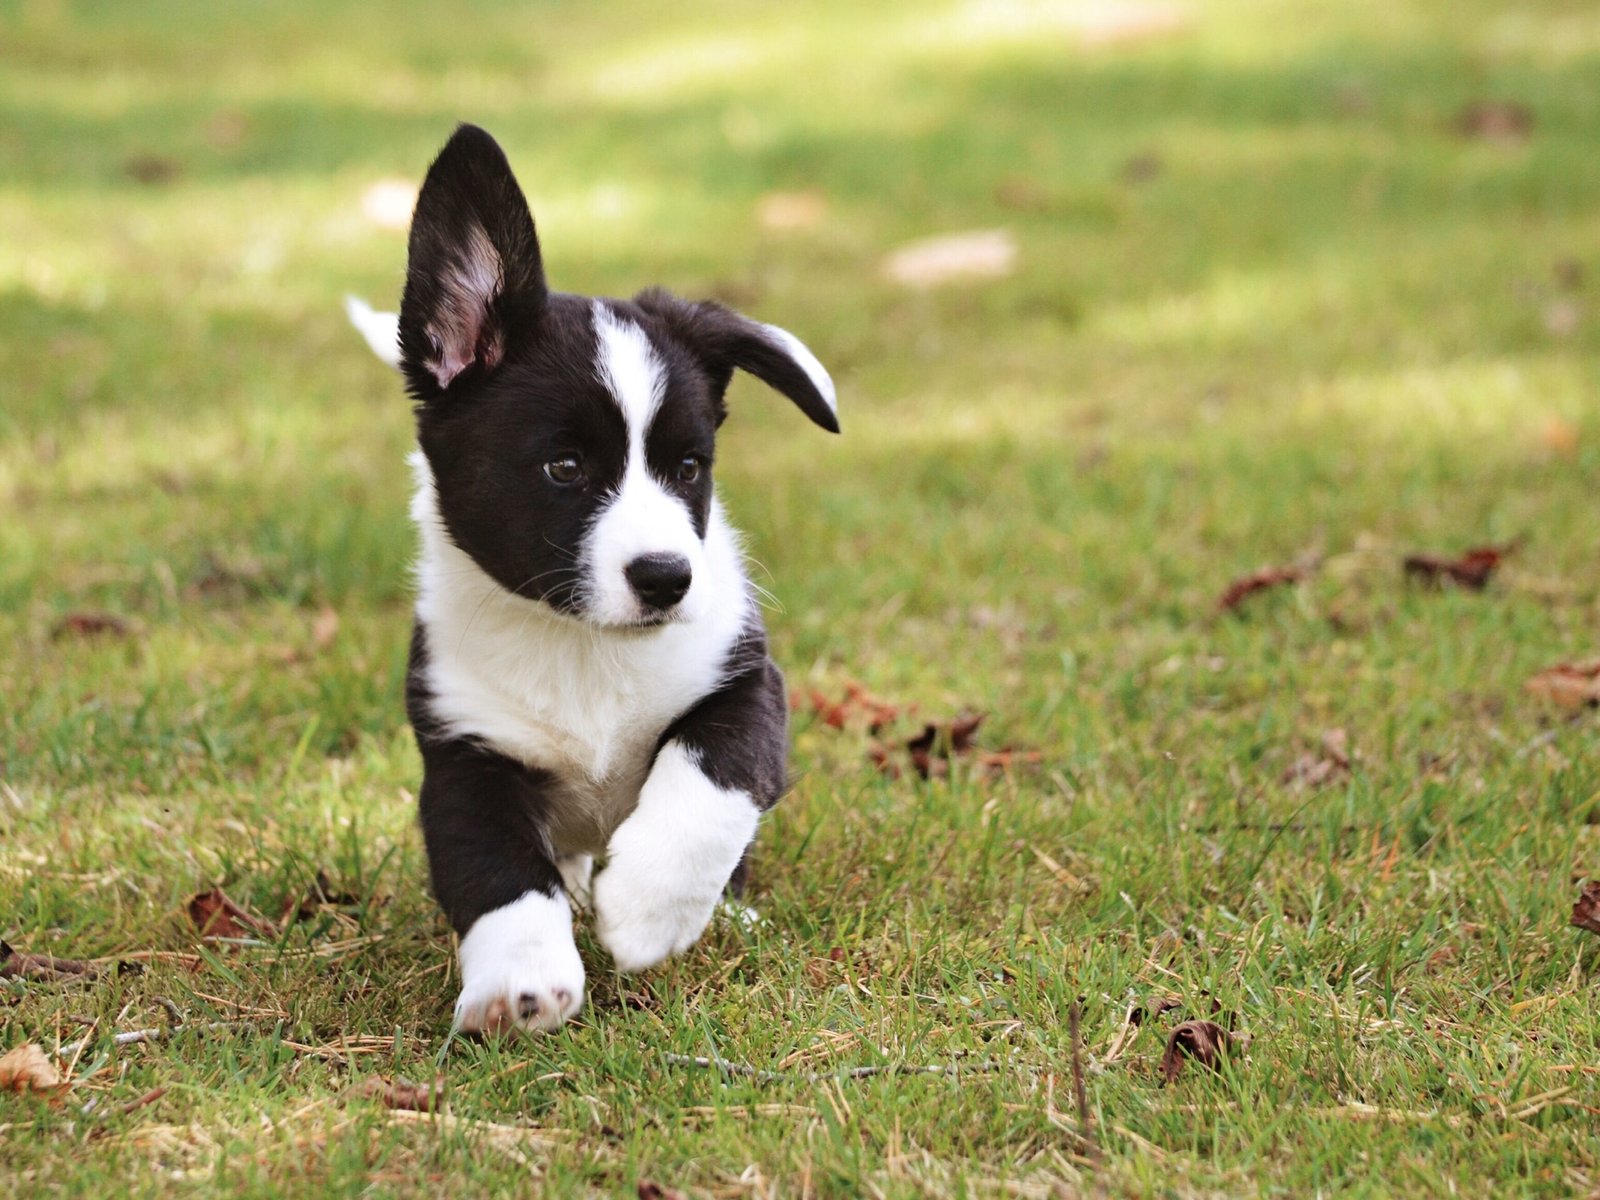 Rookies Puppy class - 11 weeks - 5.5 Months Saturday 9:30am Benowa May 28th 2022